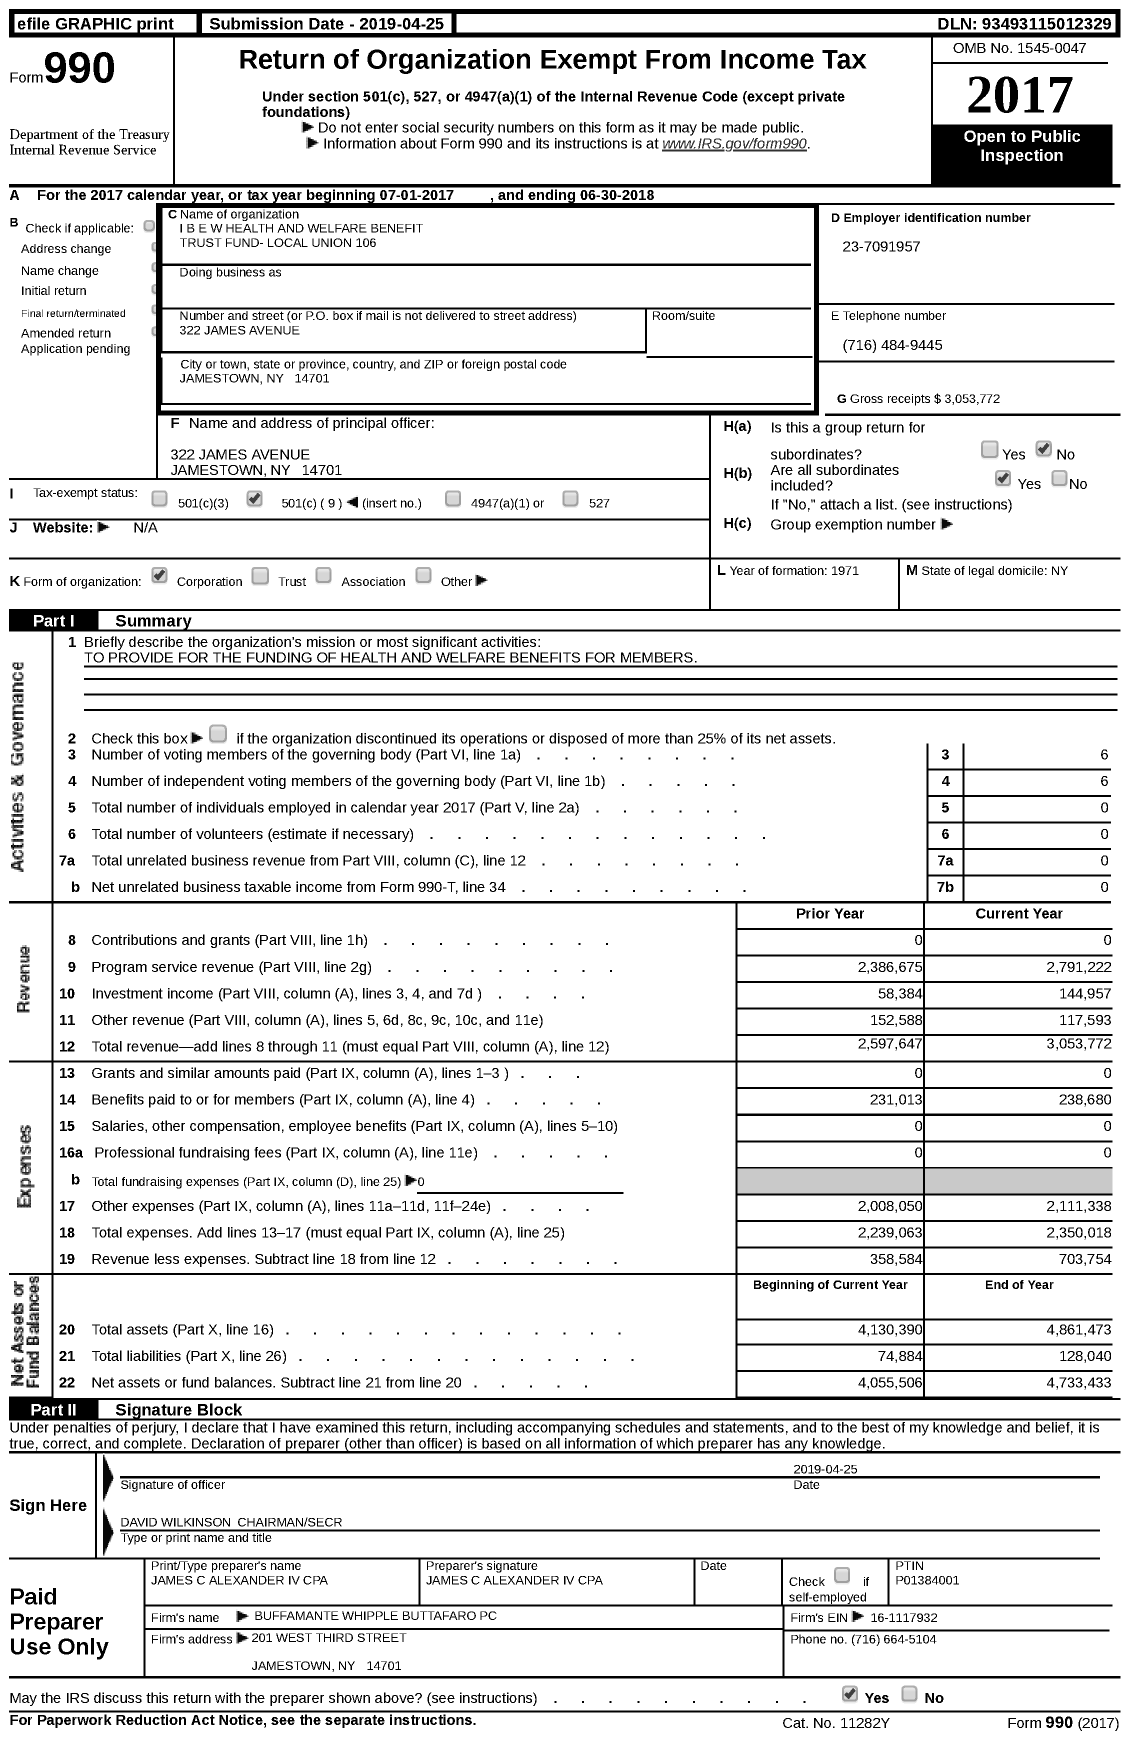 Image of first page of 2017 Form 990 for I B E W Health and Welfare Benefit Trust Fund- Local Union 106